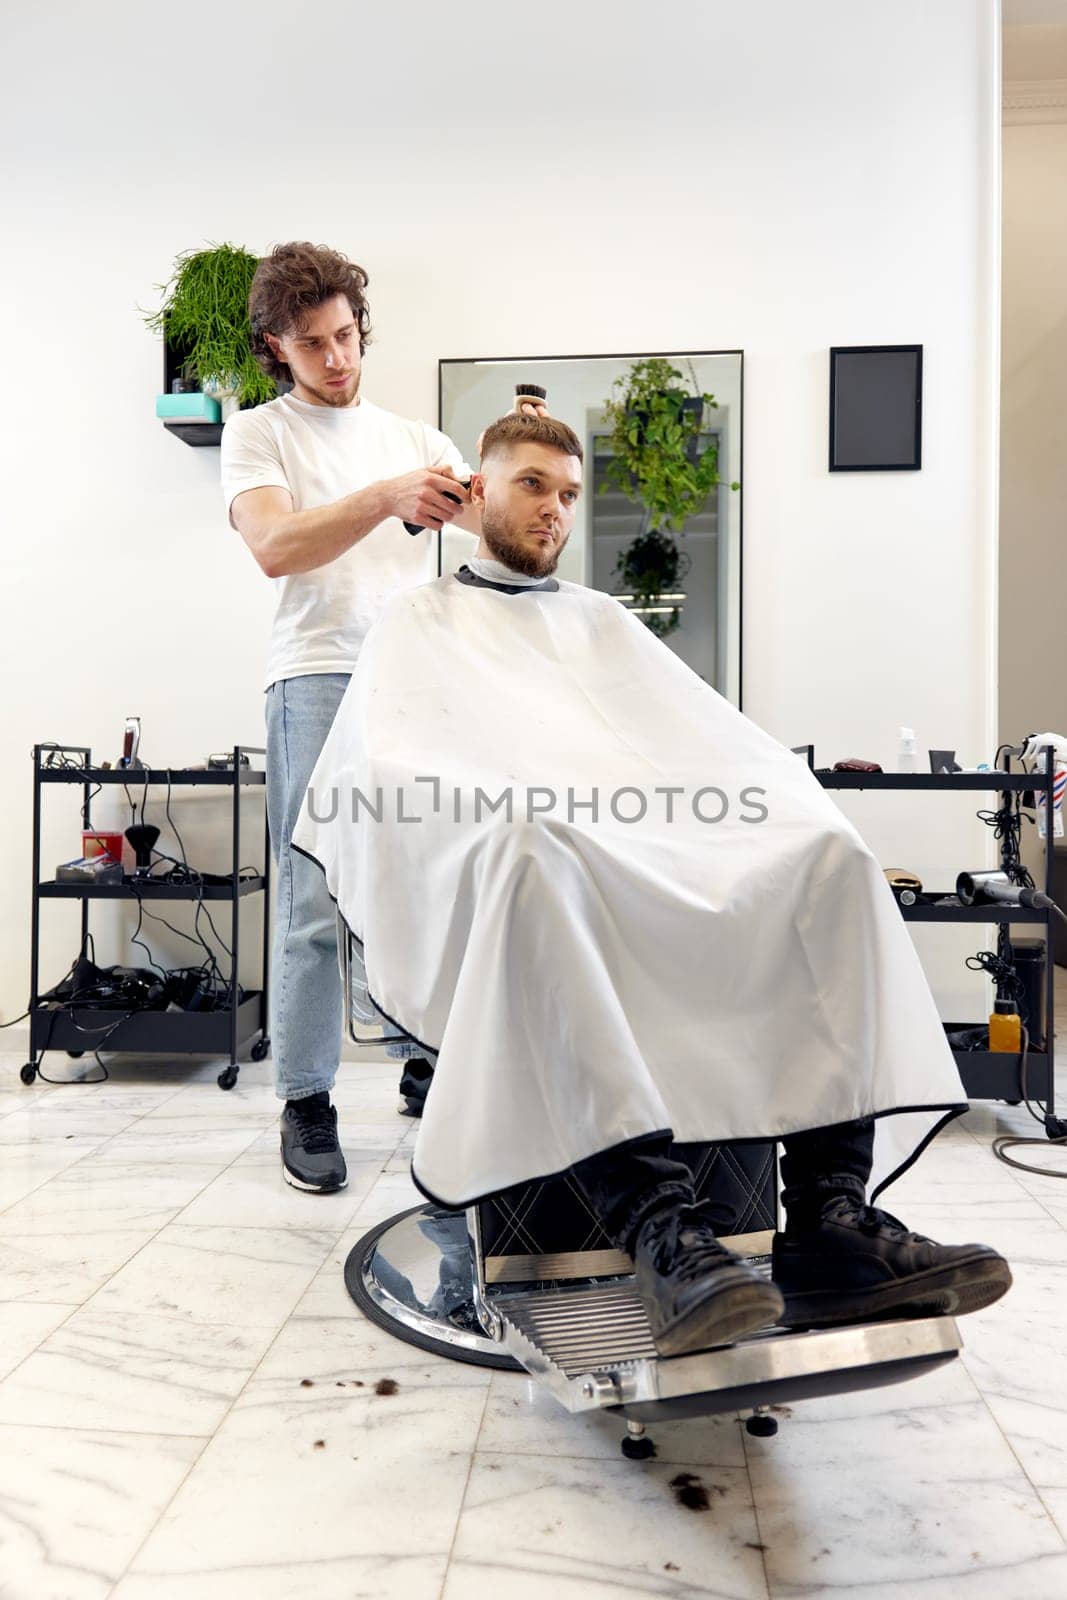 Barber trim hair with clipper on handsome bearded man by erstudio